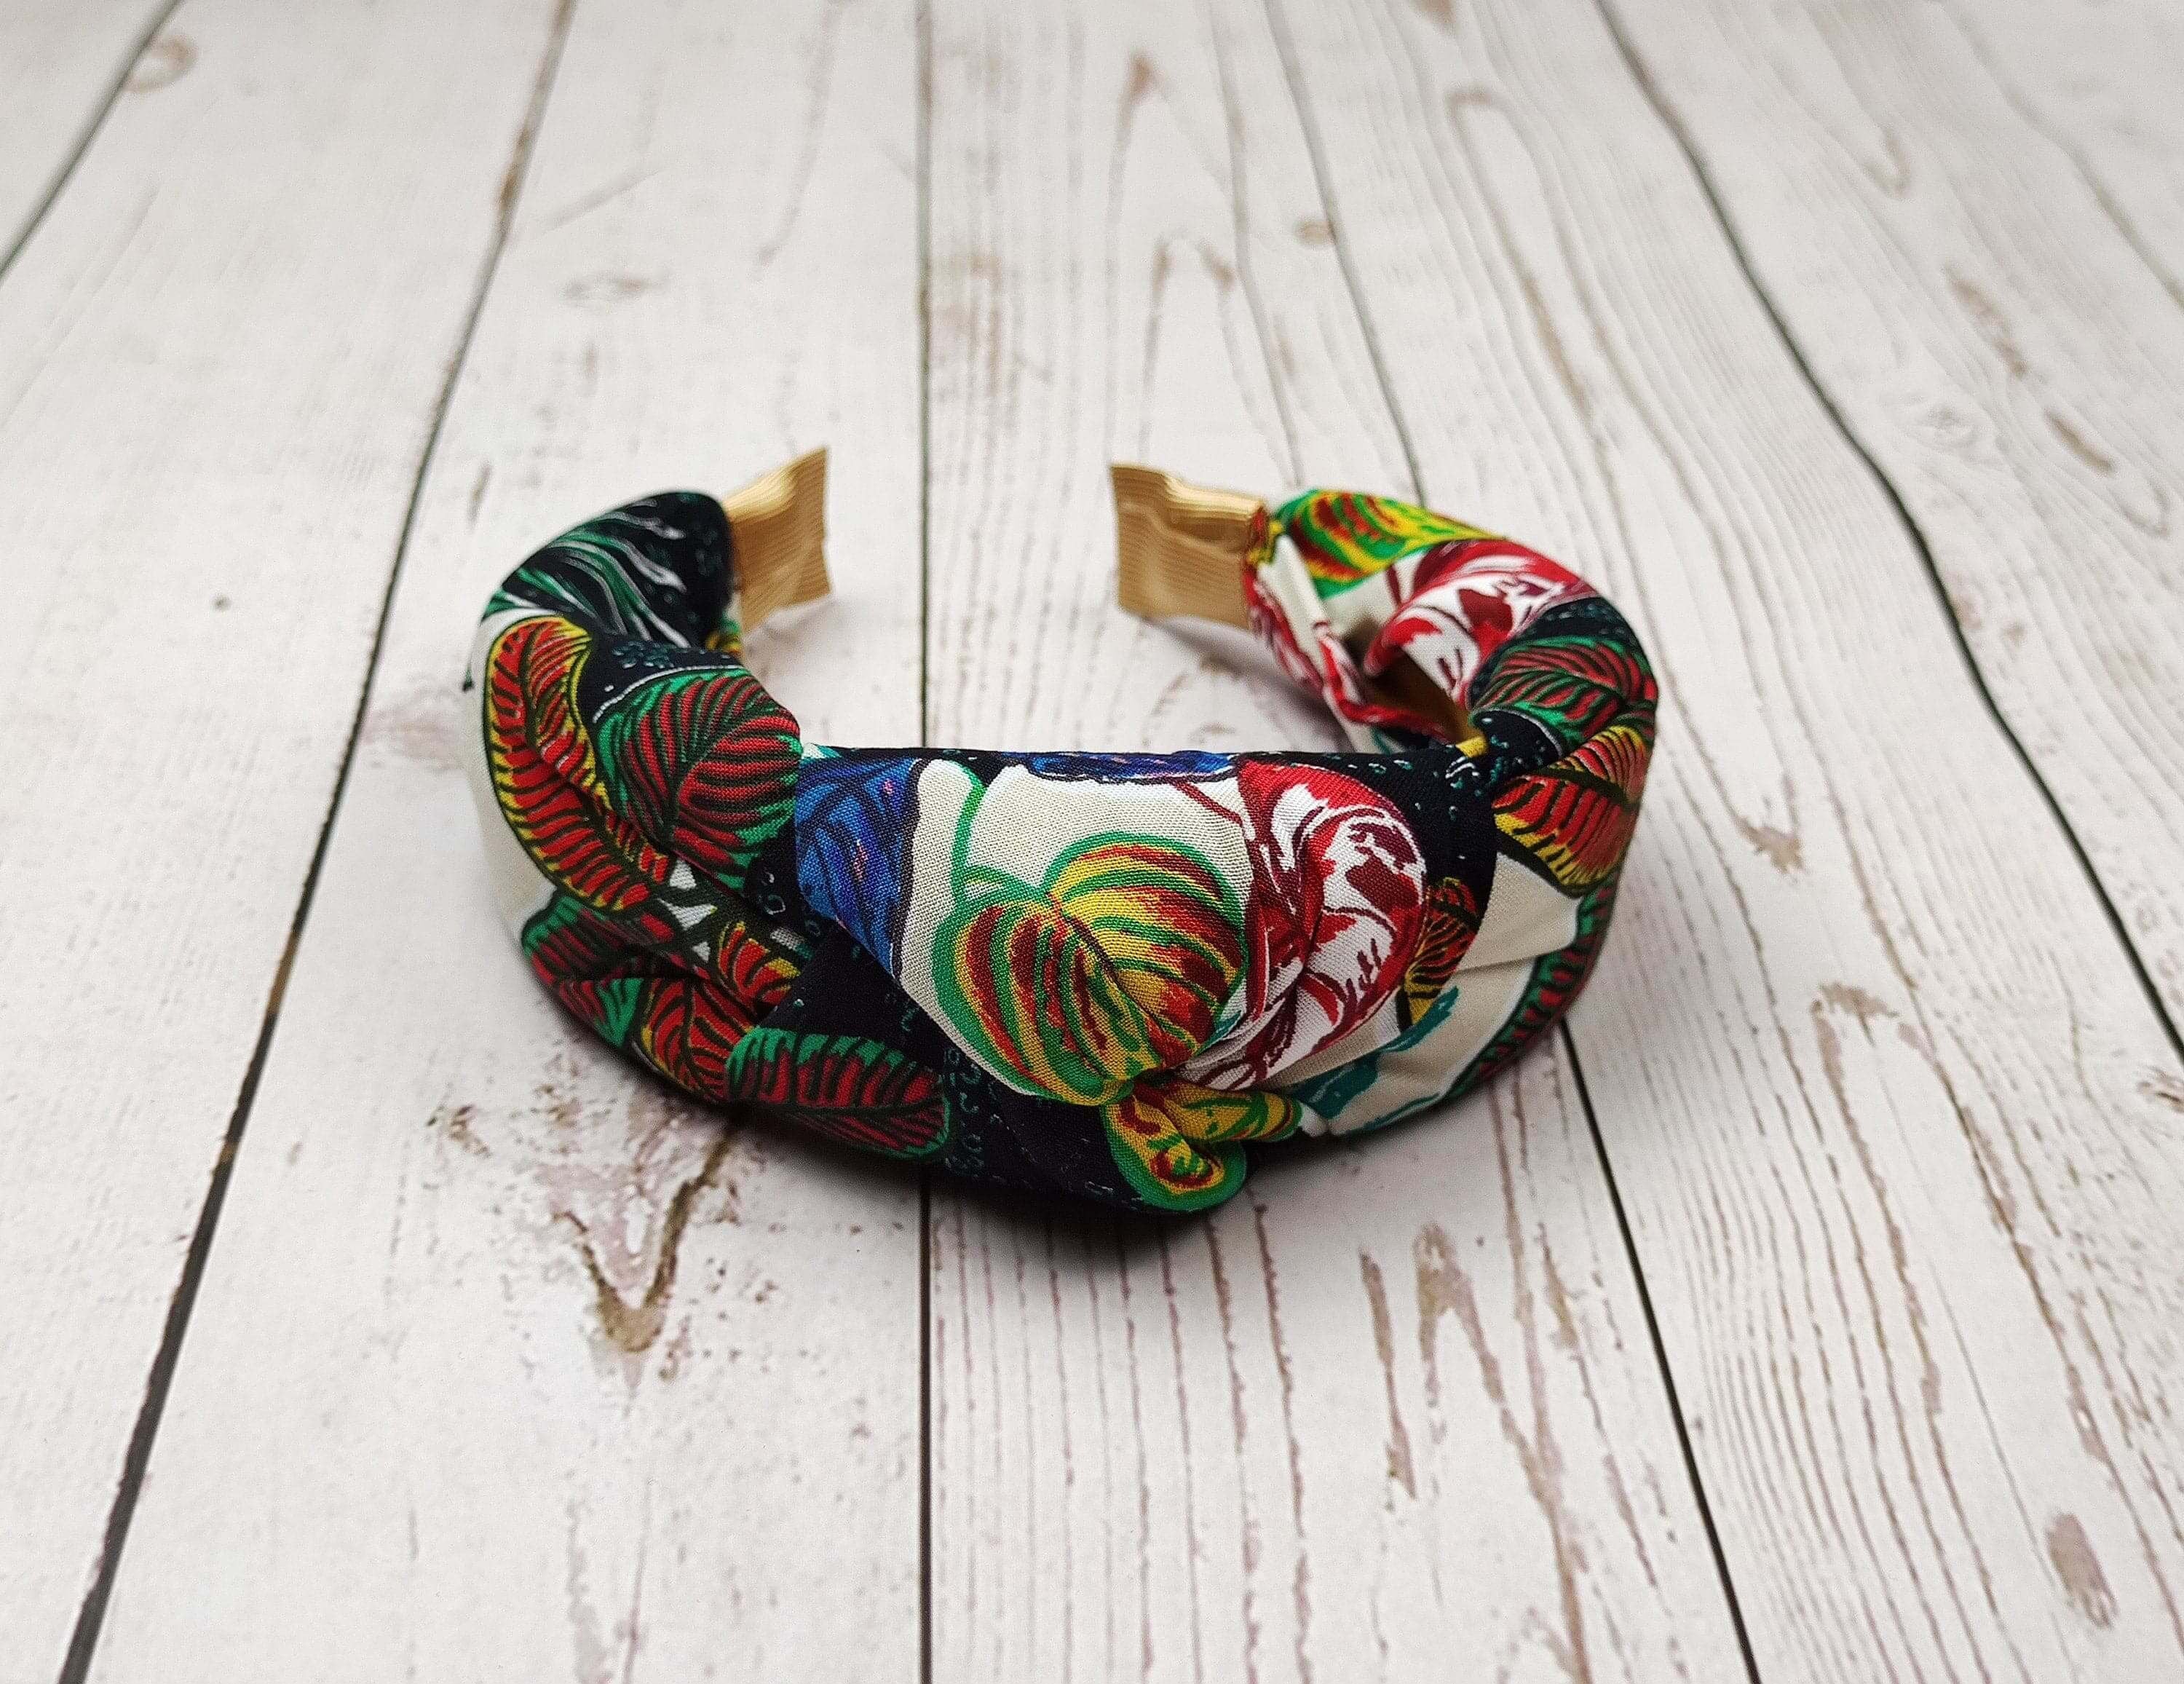 Elevate your hair game with this trendy dark blue, yellow, green, and red knotted headband.